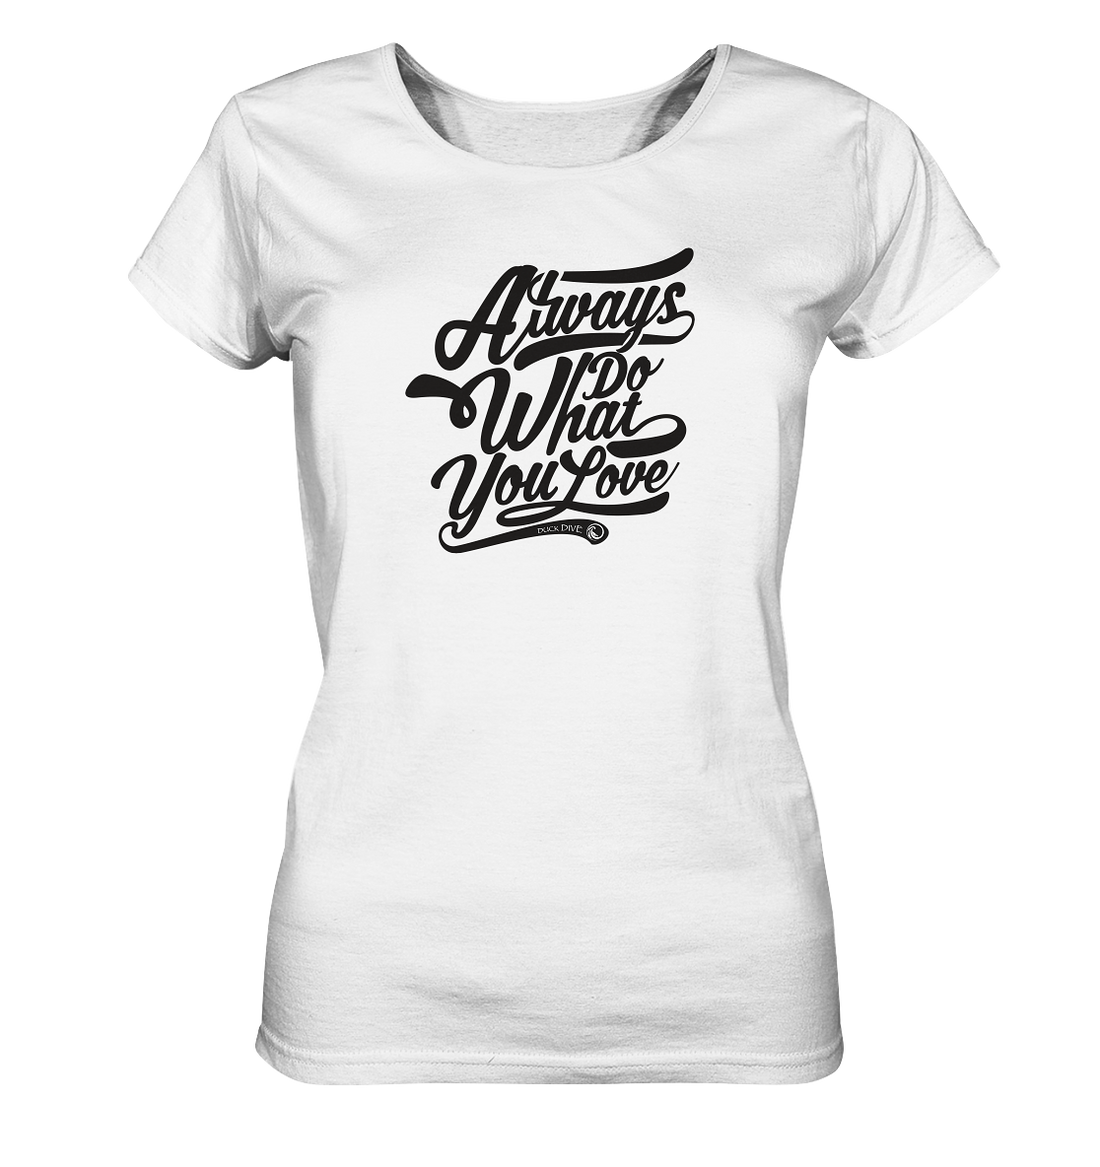 Always do what you Love - Ladies Organic Shirt - Duck Dive Clothing